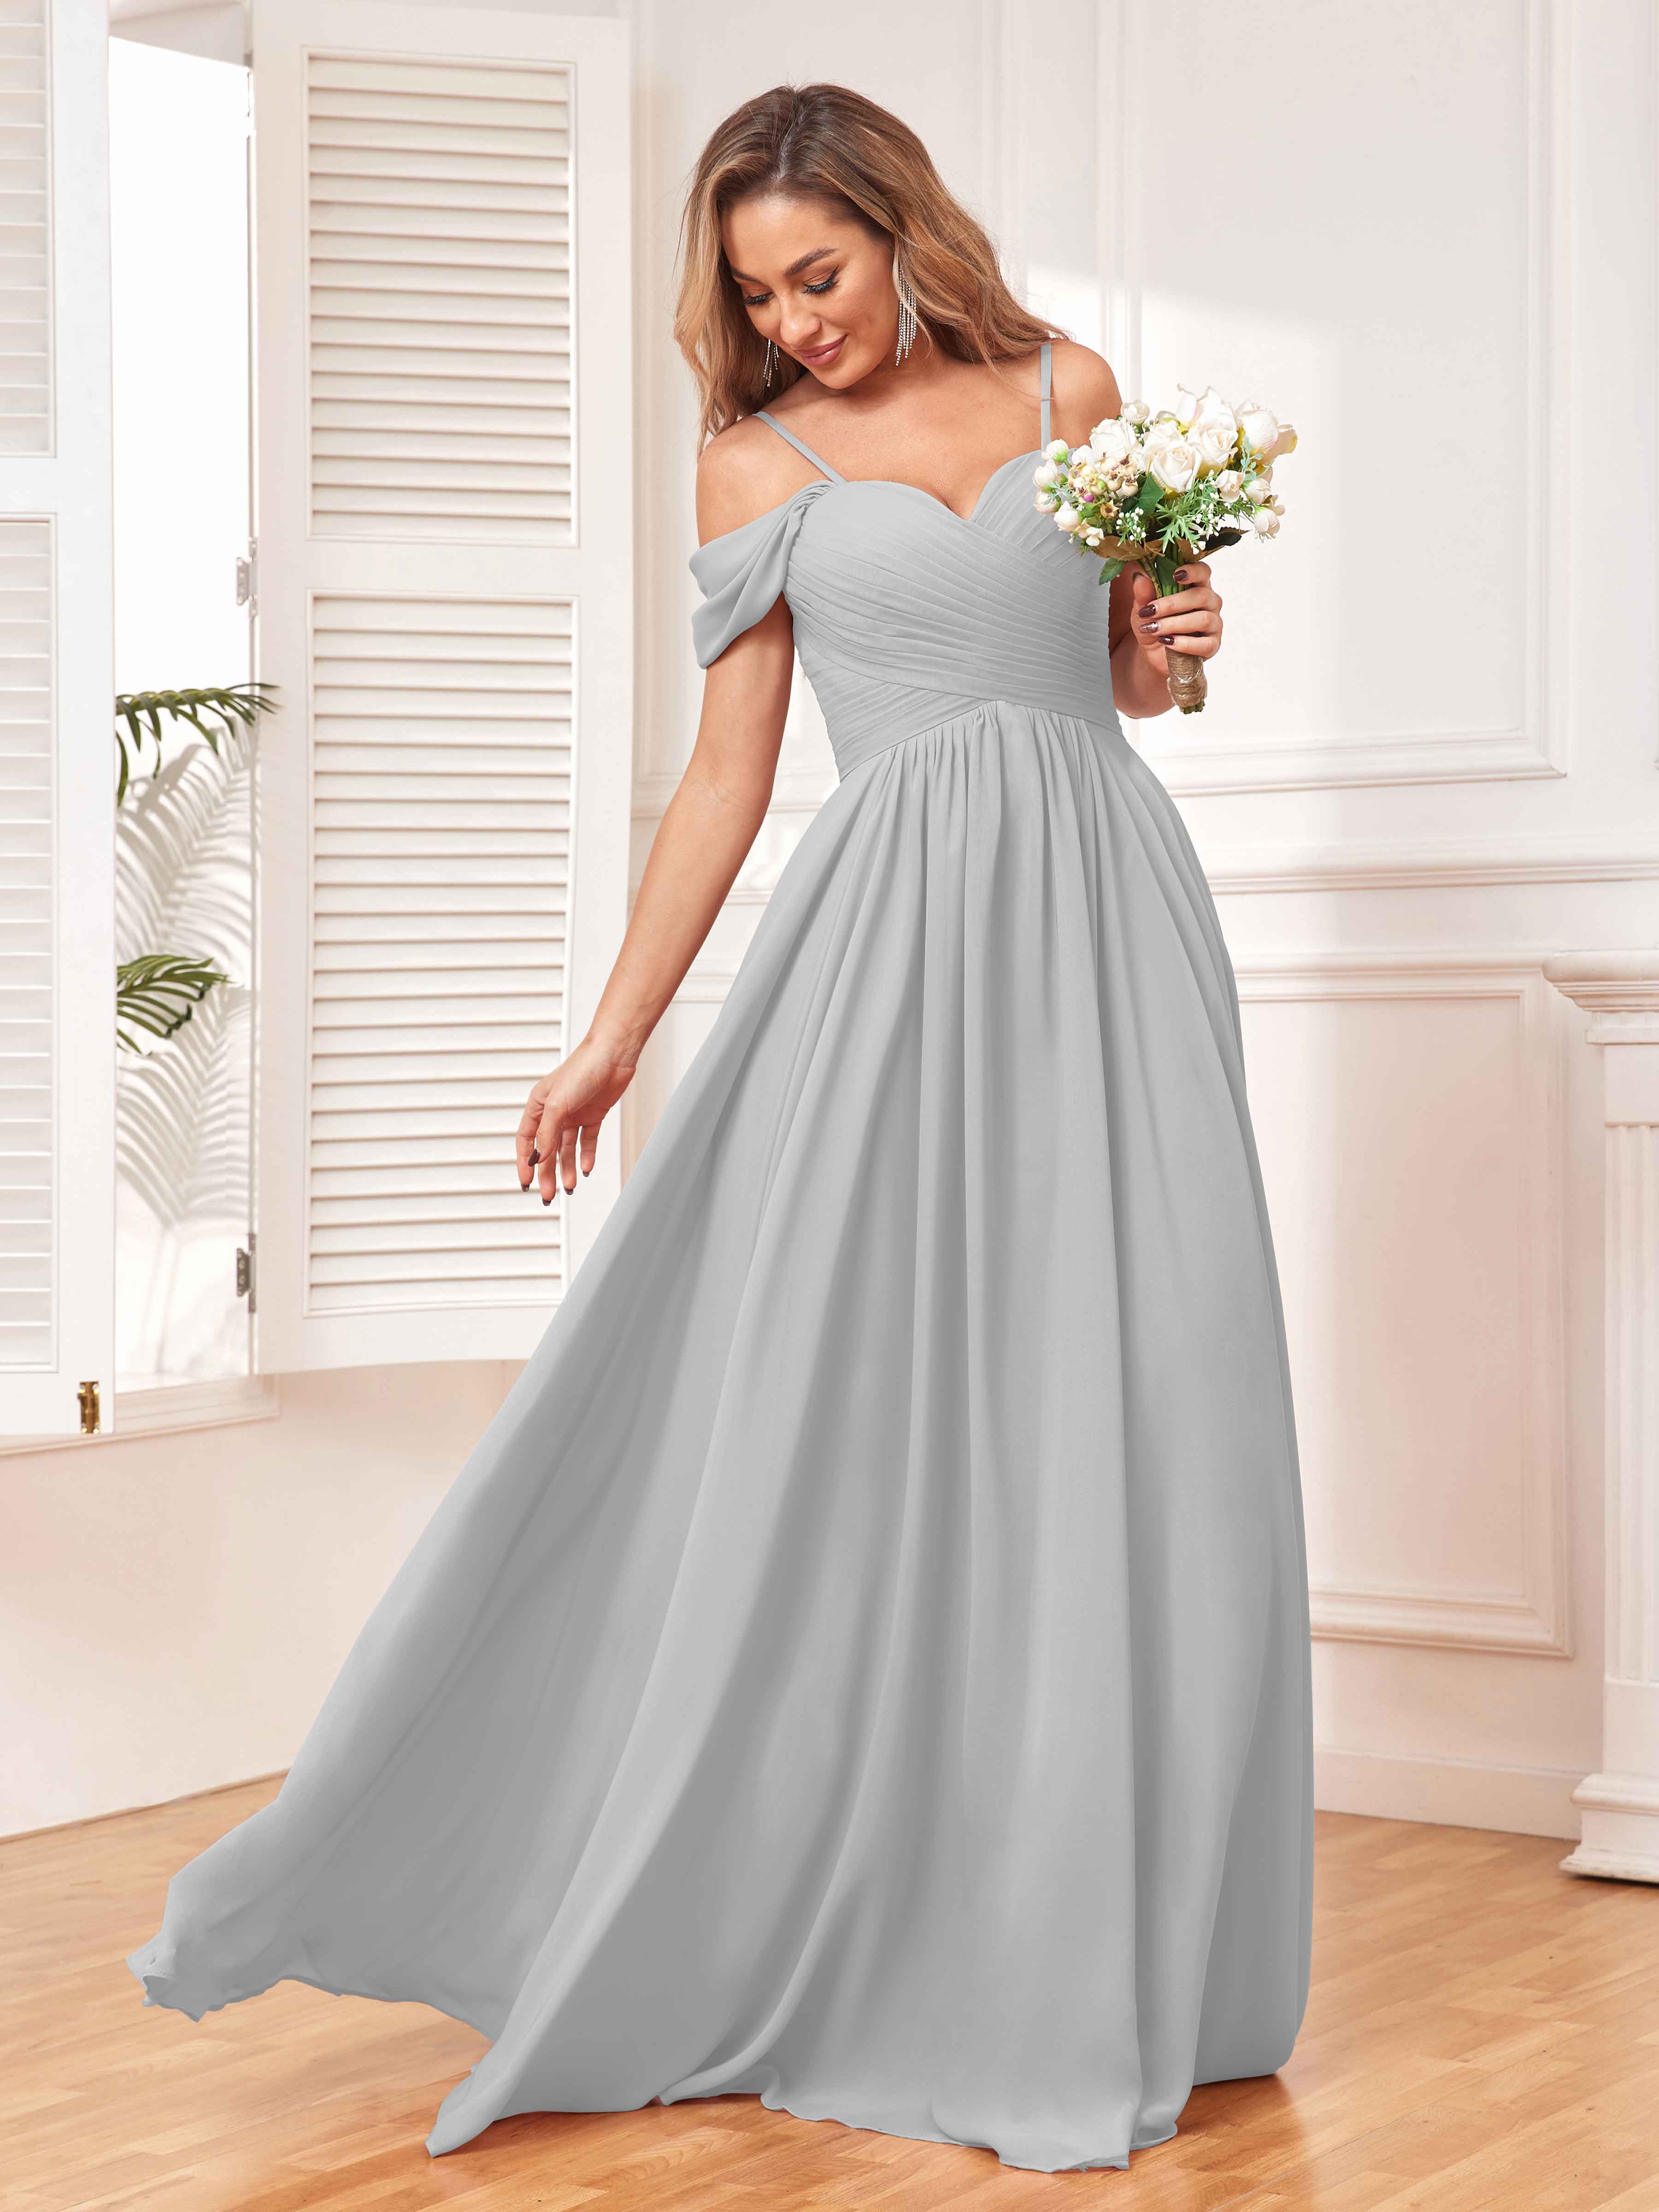 Dazzling Silver Bridesmaid Dresses & Gowns - Long, Midi and Short Styles